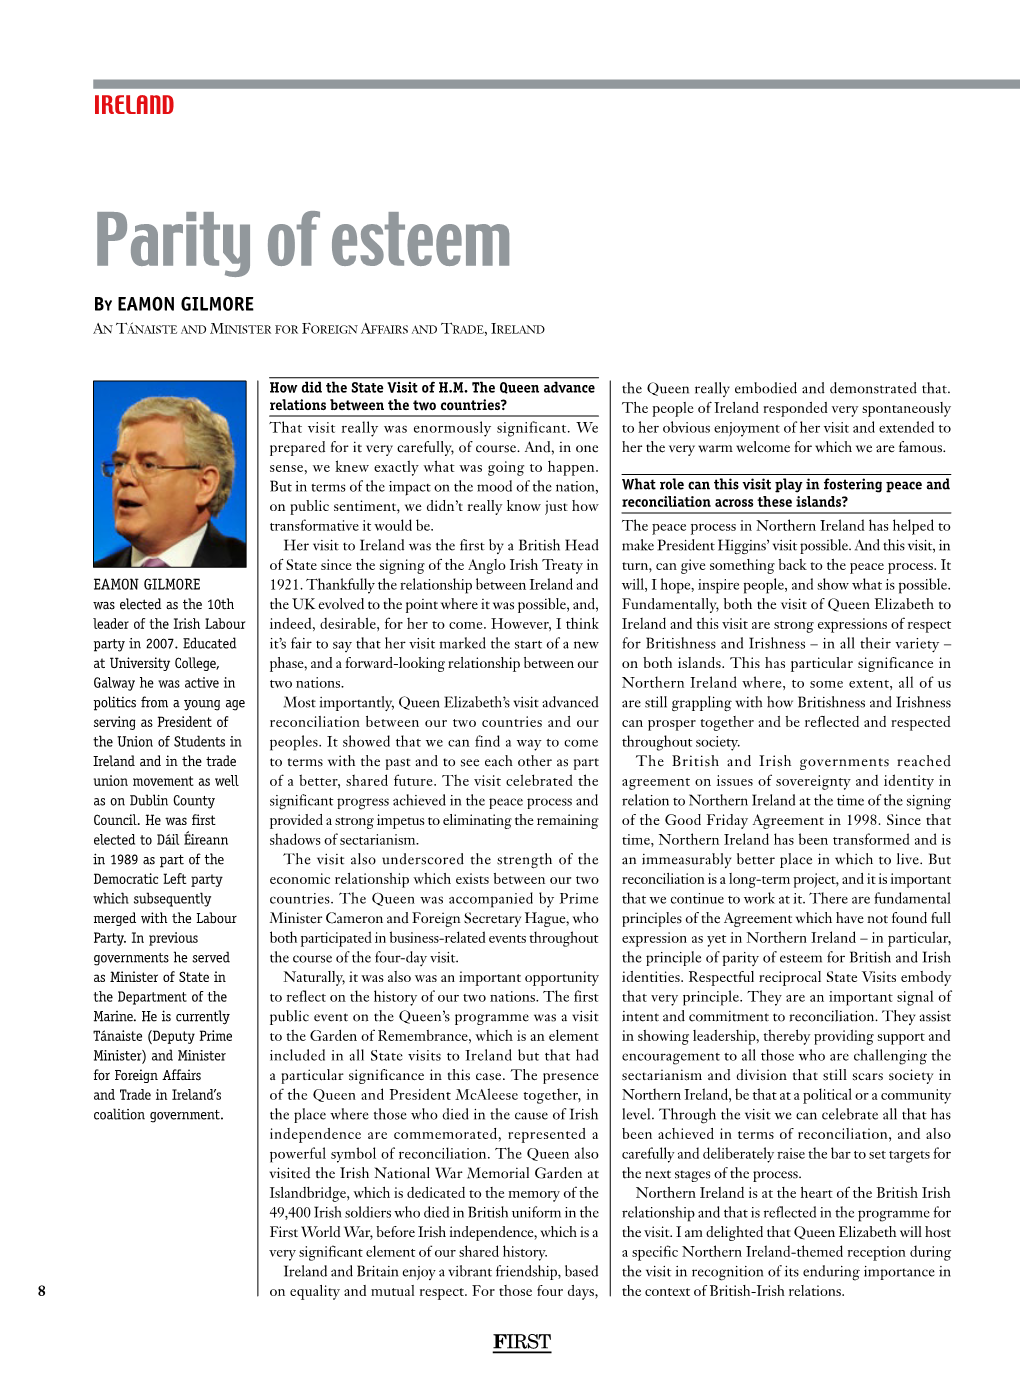 Parity of Esteem by EAMON GILMORE an Tánaiste and Minister for Foreign Affairs and Trade, Ireland